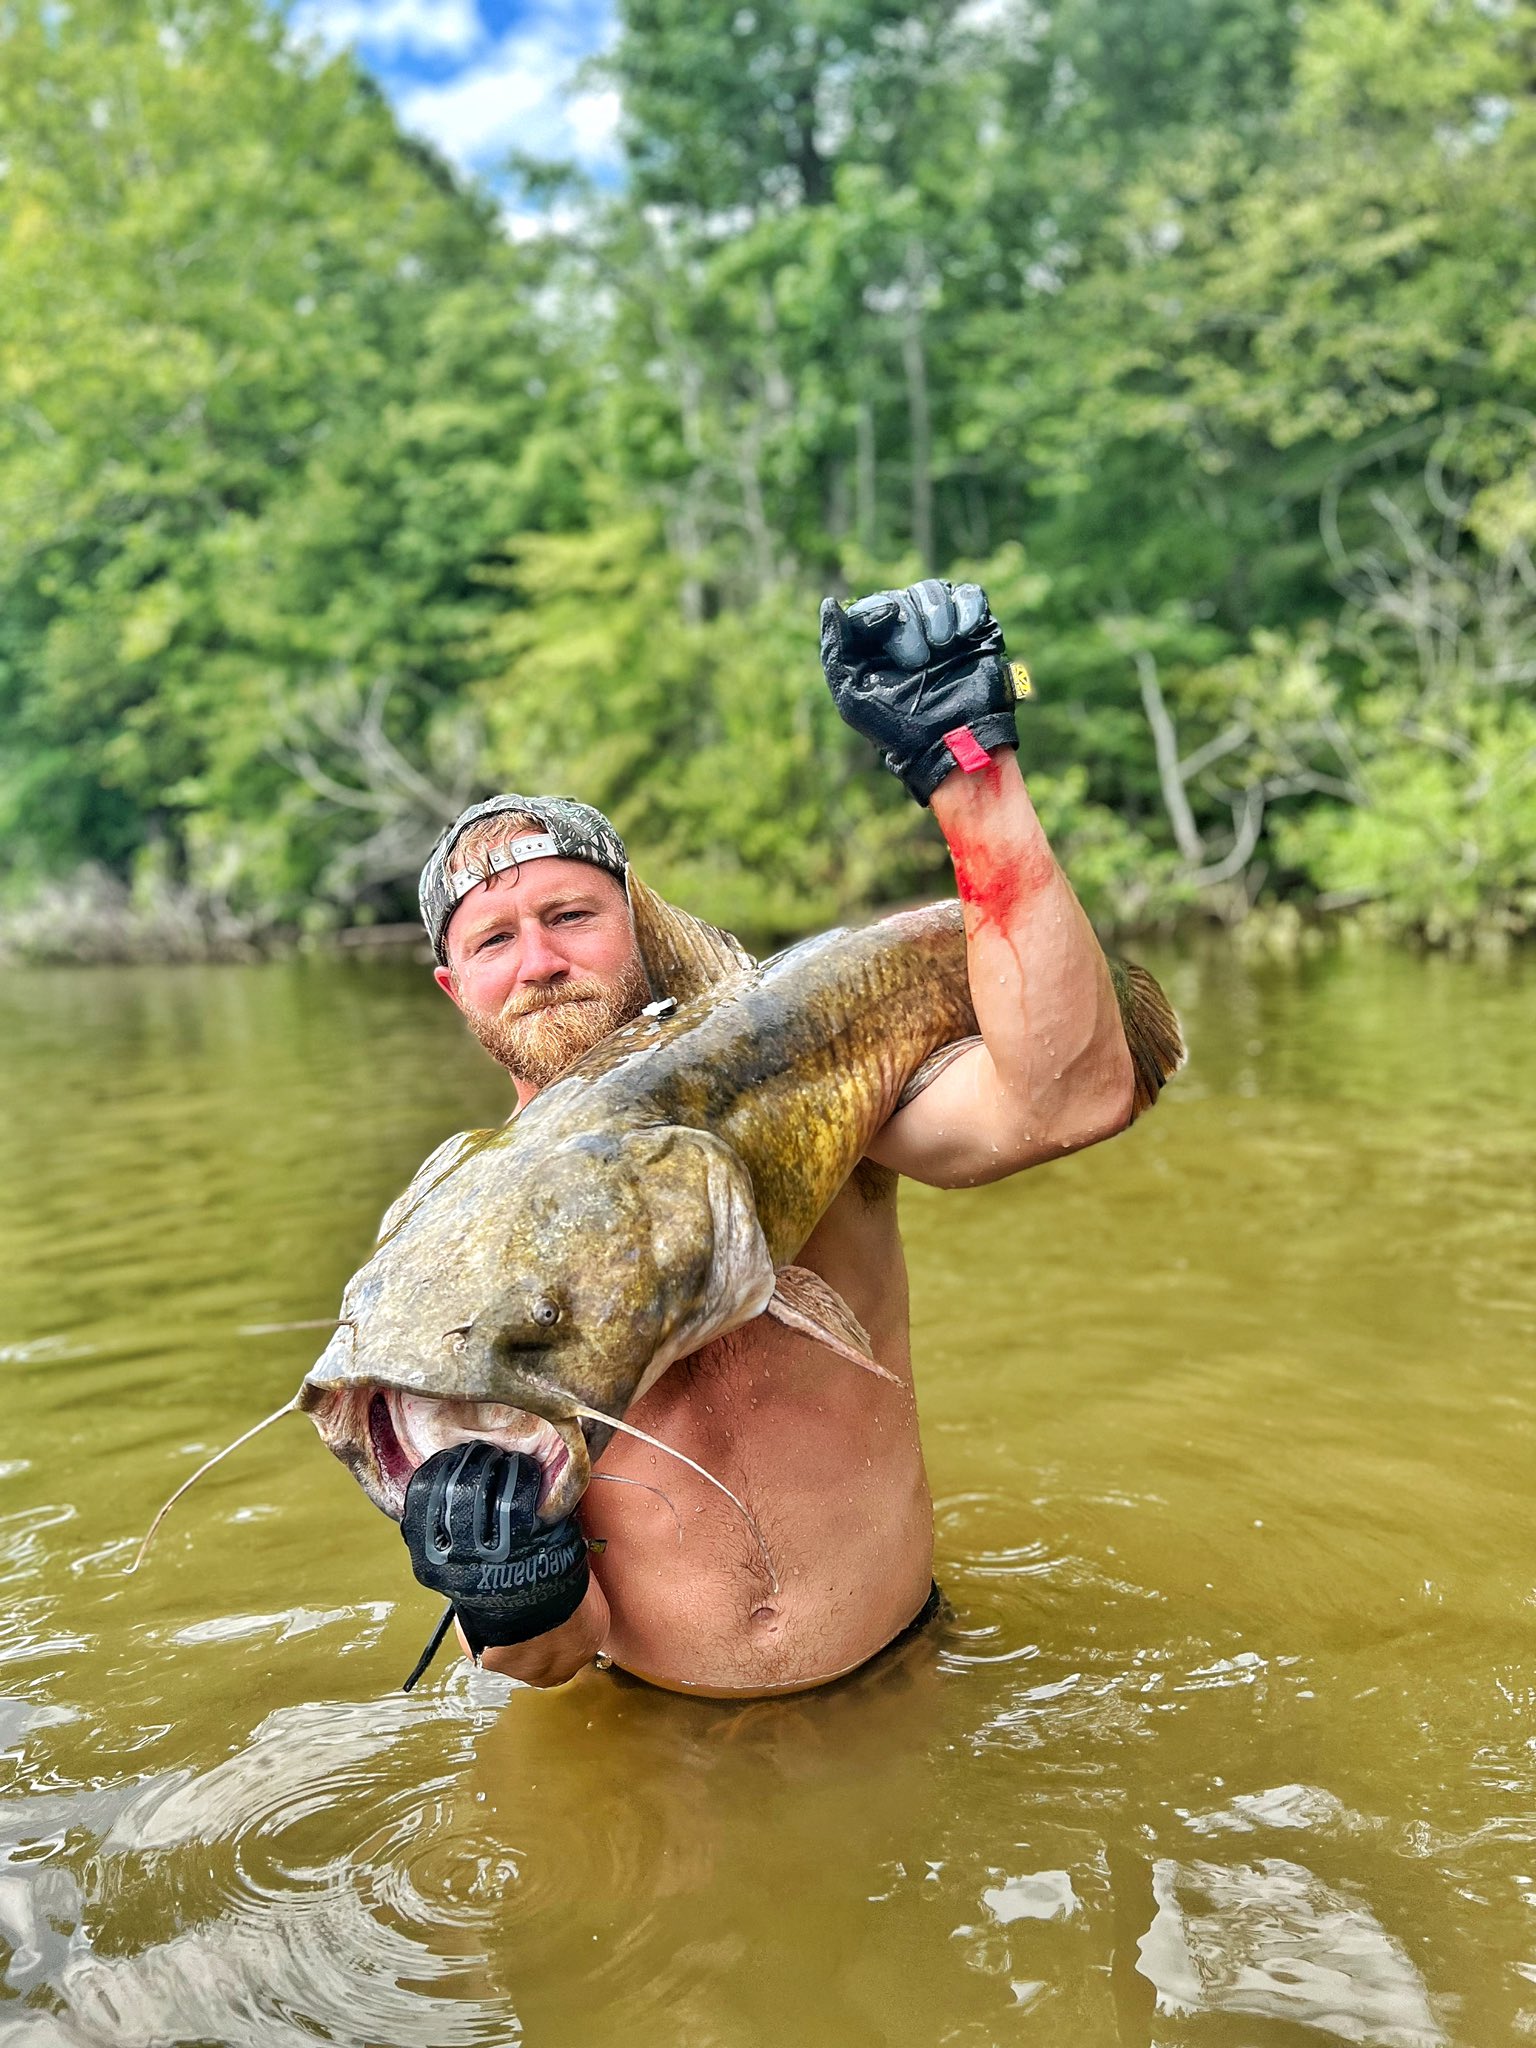 Jeffrey Earnhardt on X: Chicks dig scars right haha. People always ask if  noodling hurts, well that all depends on the fish and the situation. At the  end of the day the